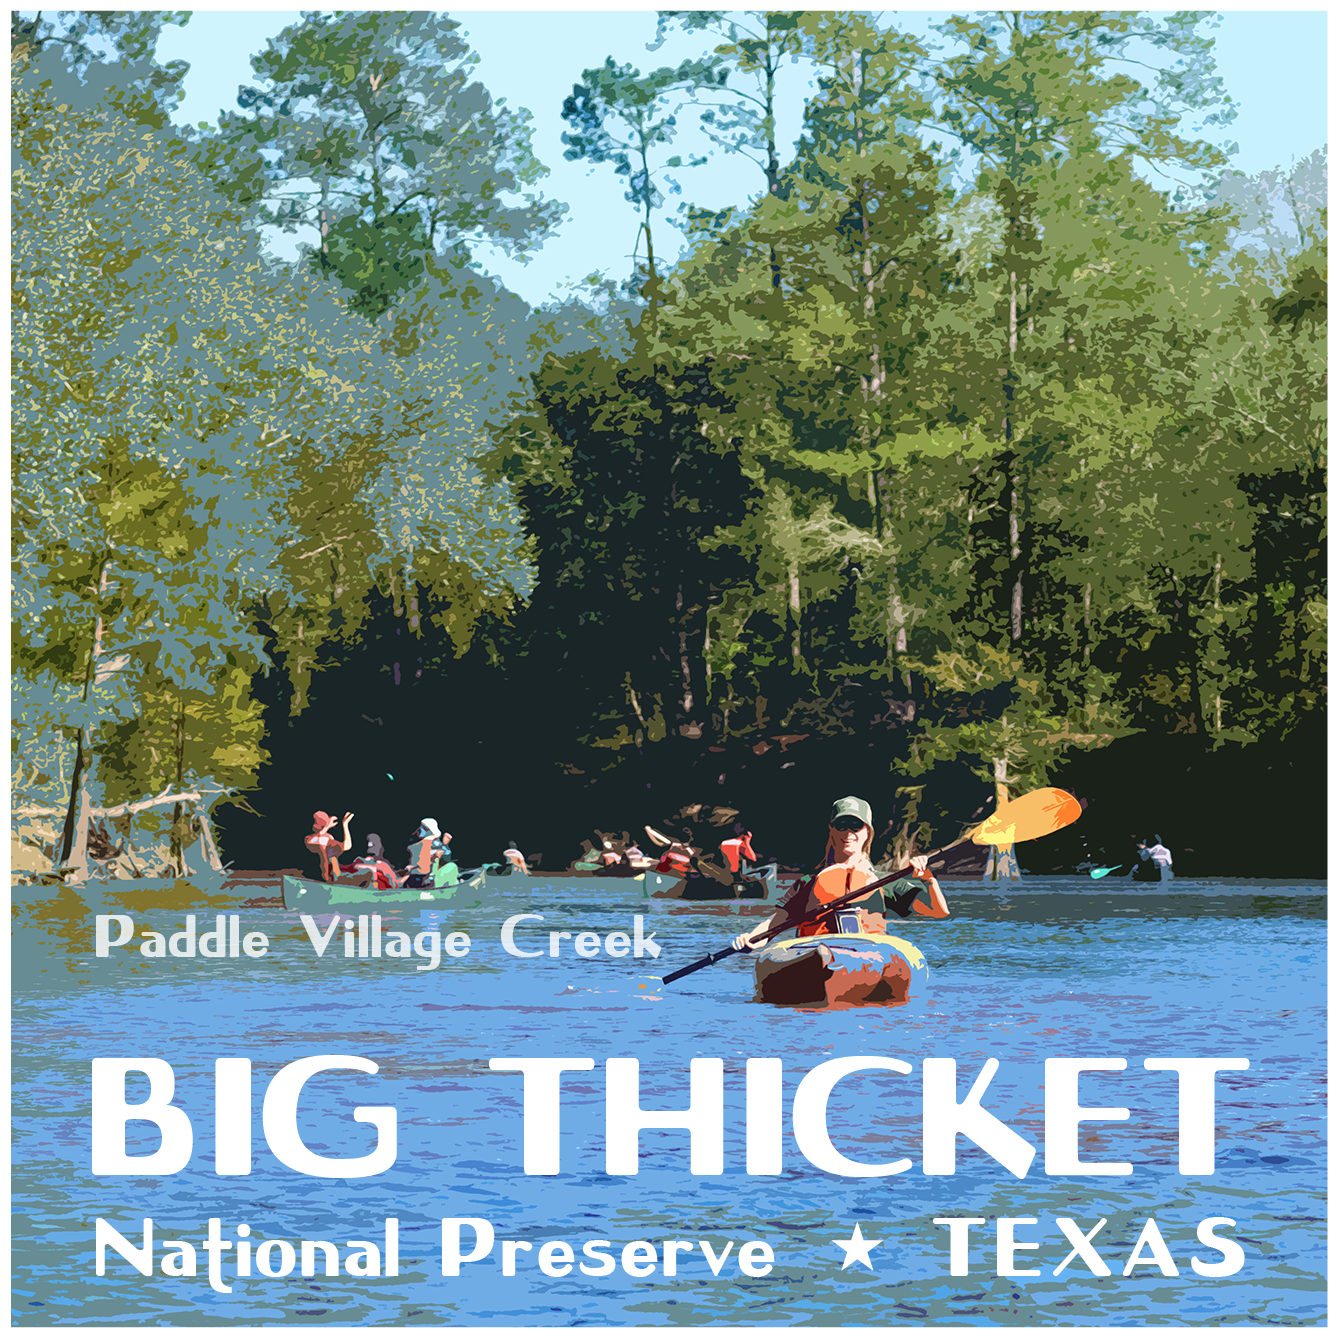 poster of people kayaking on Village Creek on a sunny day. Text reads "Paddle Village Creek" and "Big Thicket National Preserve Texas"